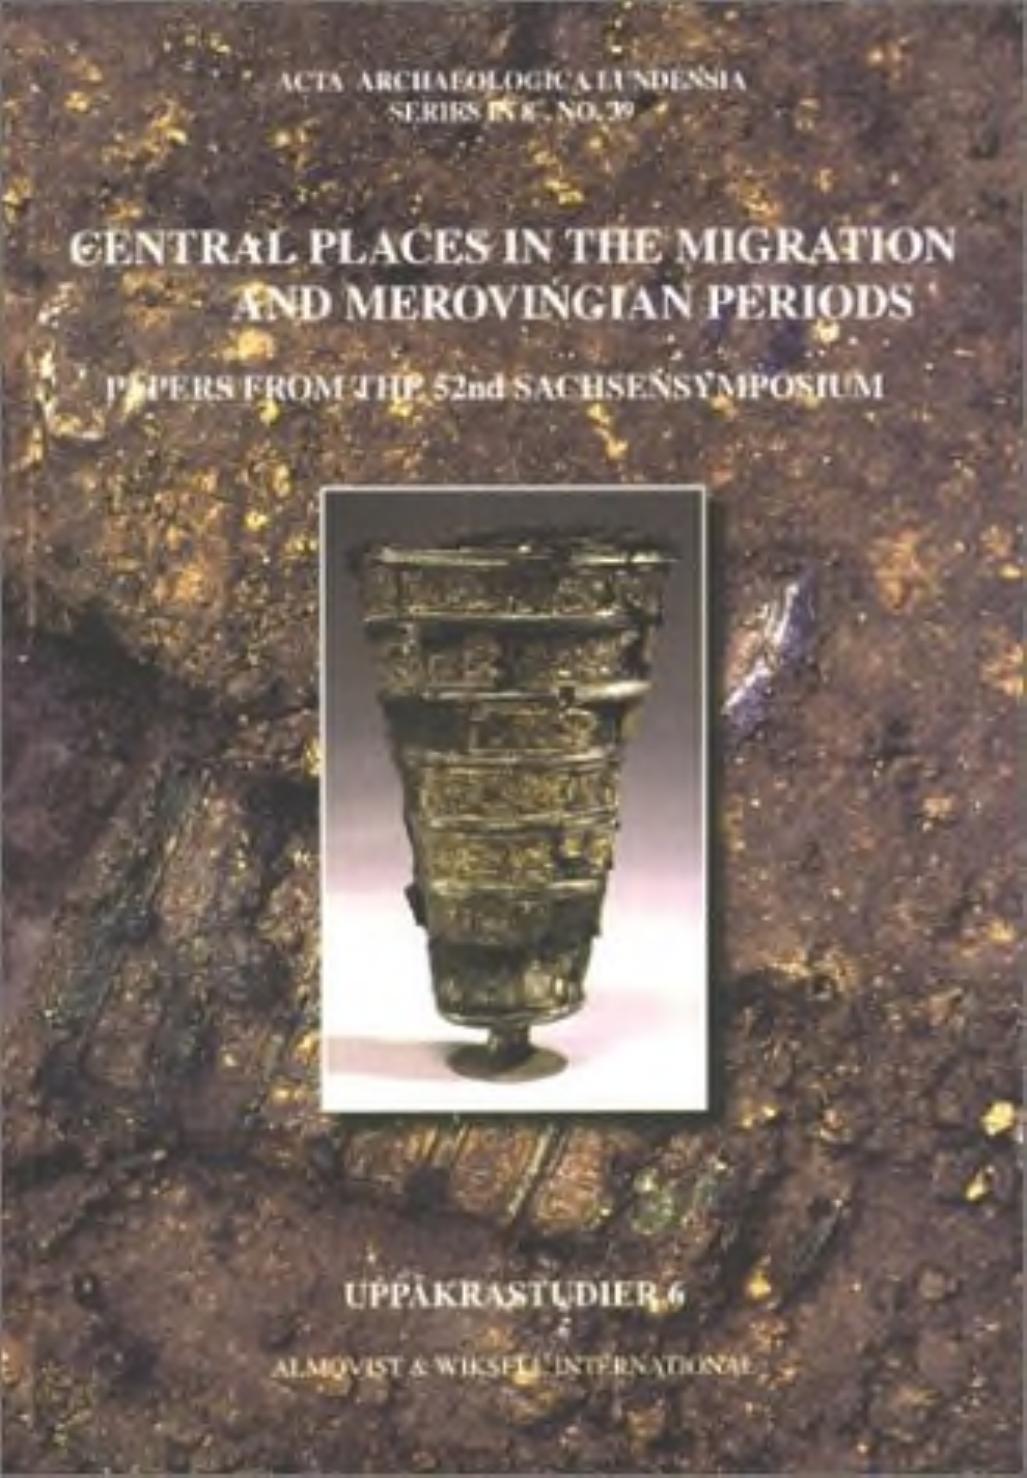 Central Places in the Migration and Merovingian Periods: Papers From the 52nd Sachsensymposium, Lund, August 2001